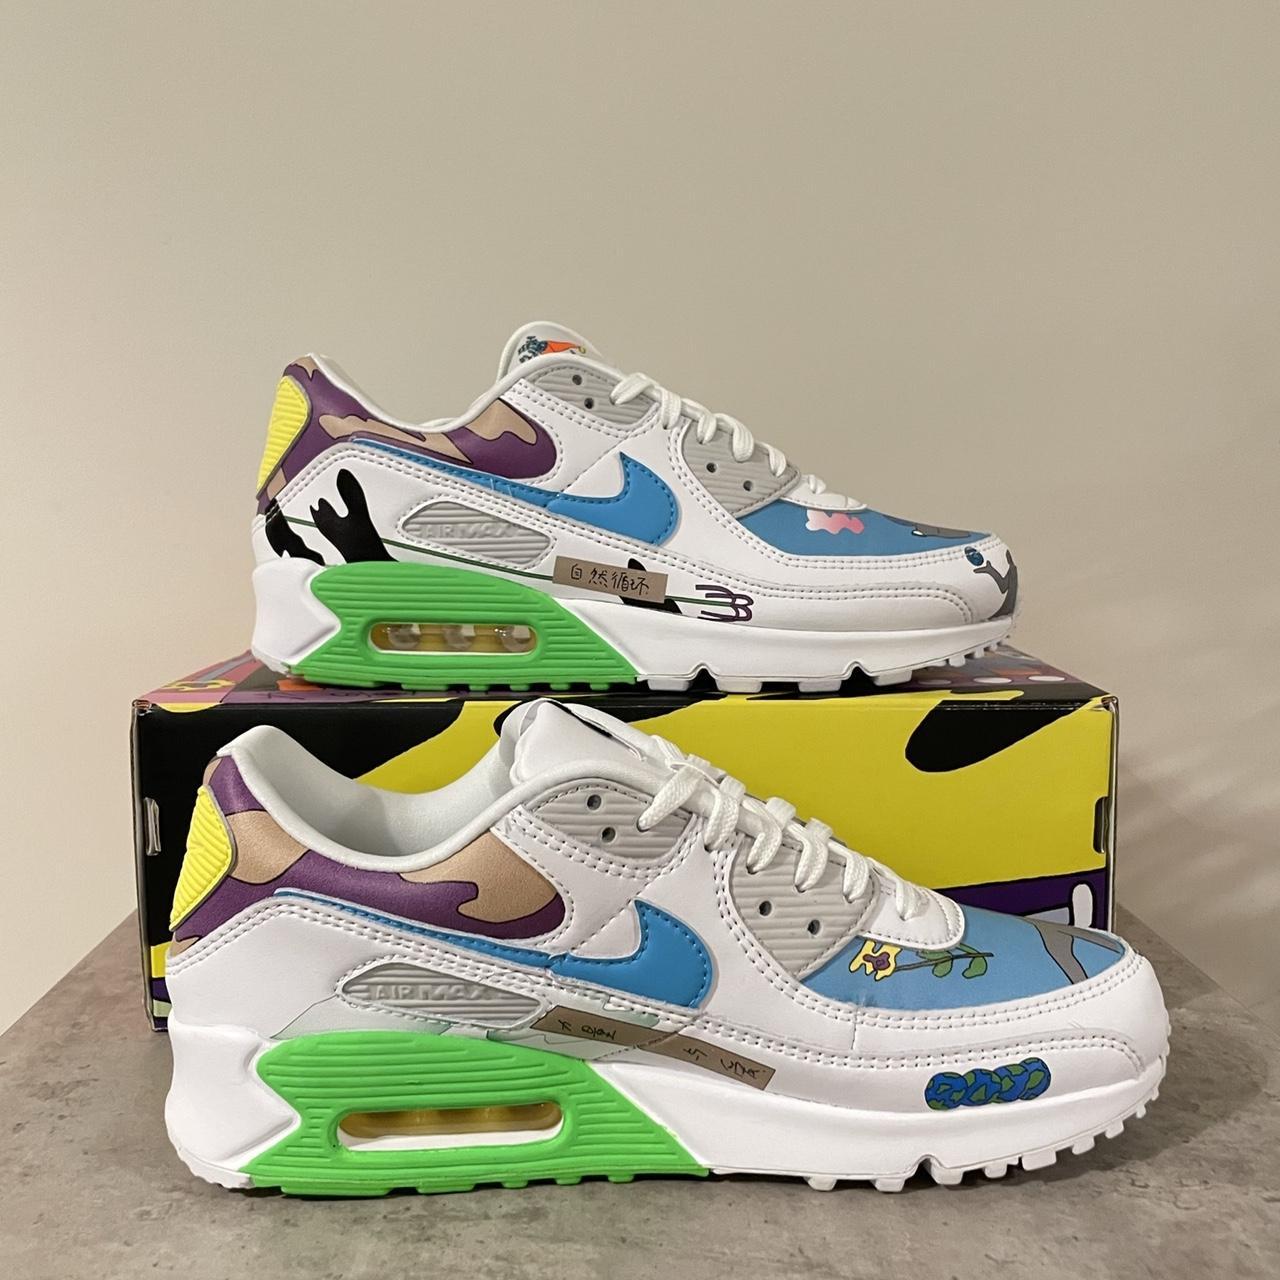 Nike Air Max 90 Flyleather Ruohan Wang - Brand New -... - Depop